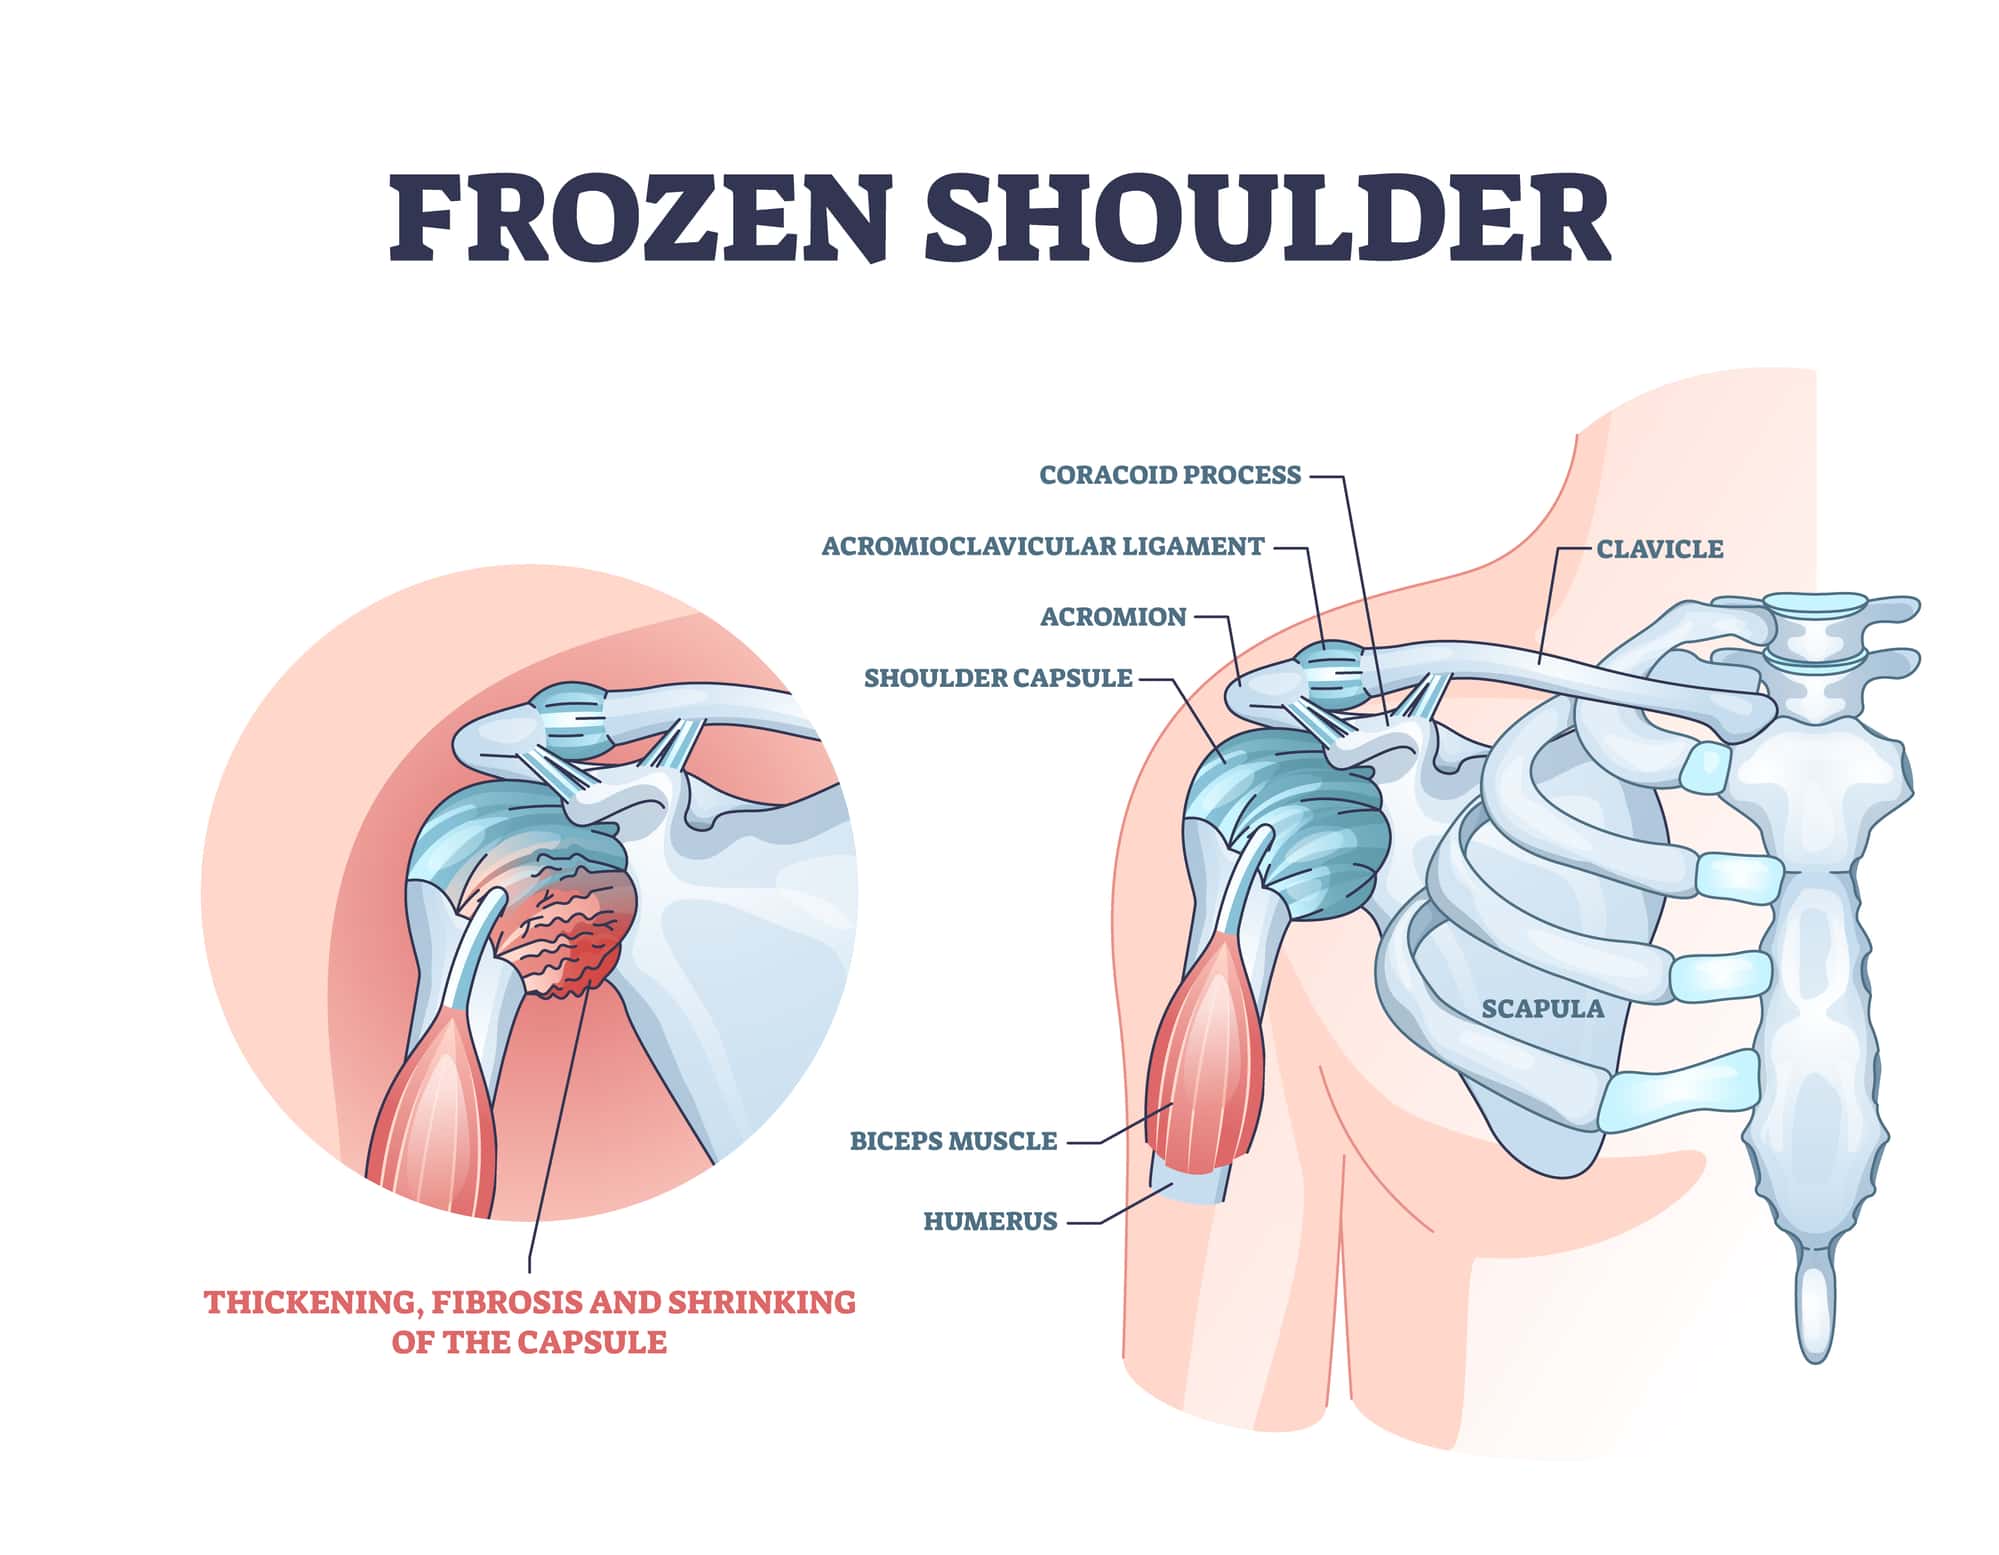 Frozen shoulder condition or adhesive capsulitis syndrome outline diagram. Labeled educational medical diagnosis with pain and stiffness around body upper part with movement limits vector illustration